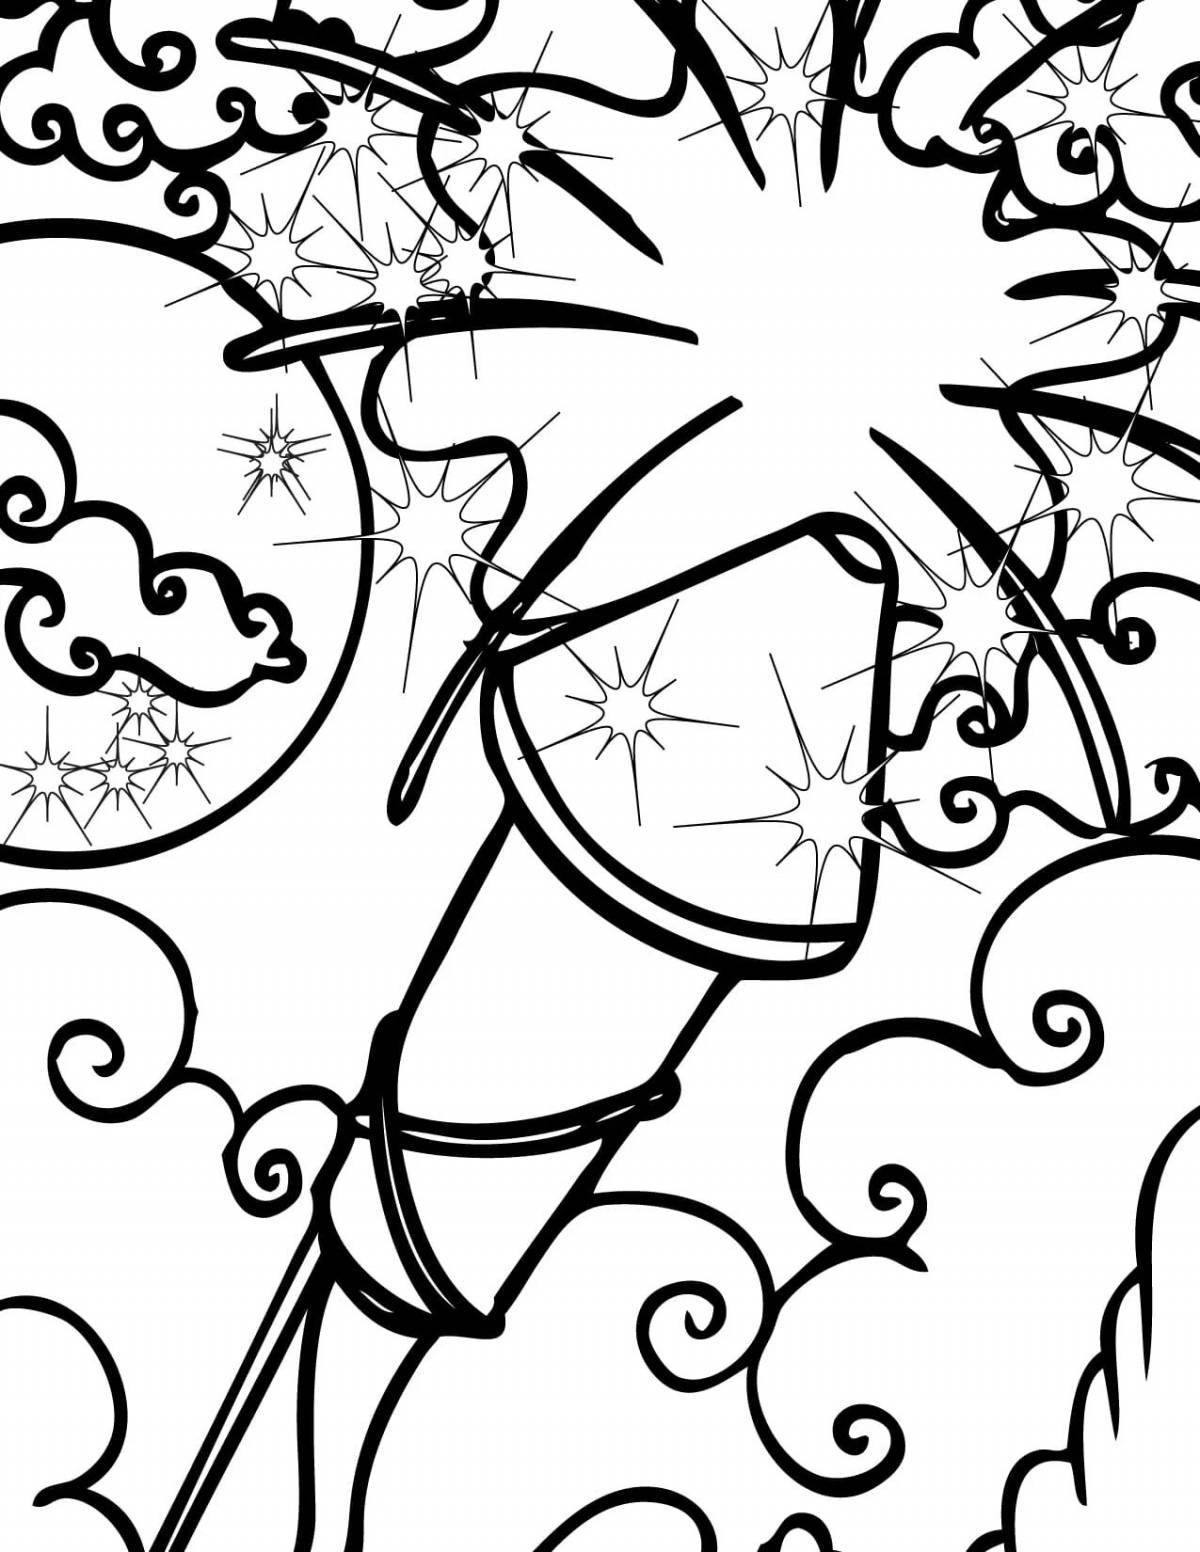 Fancy Christmas cracker coloring page